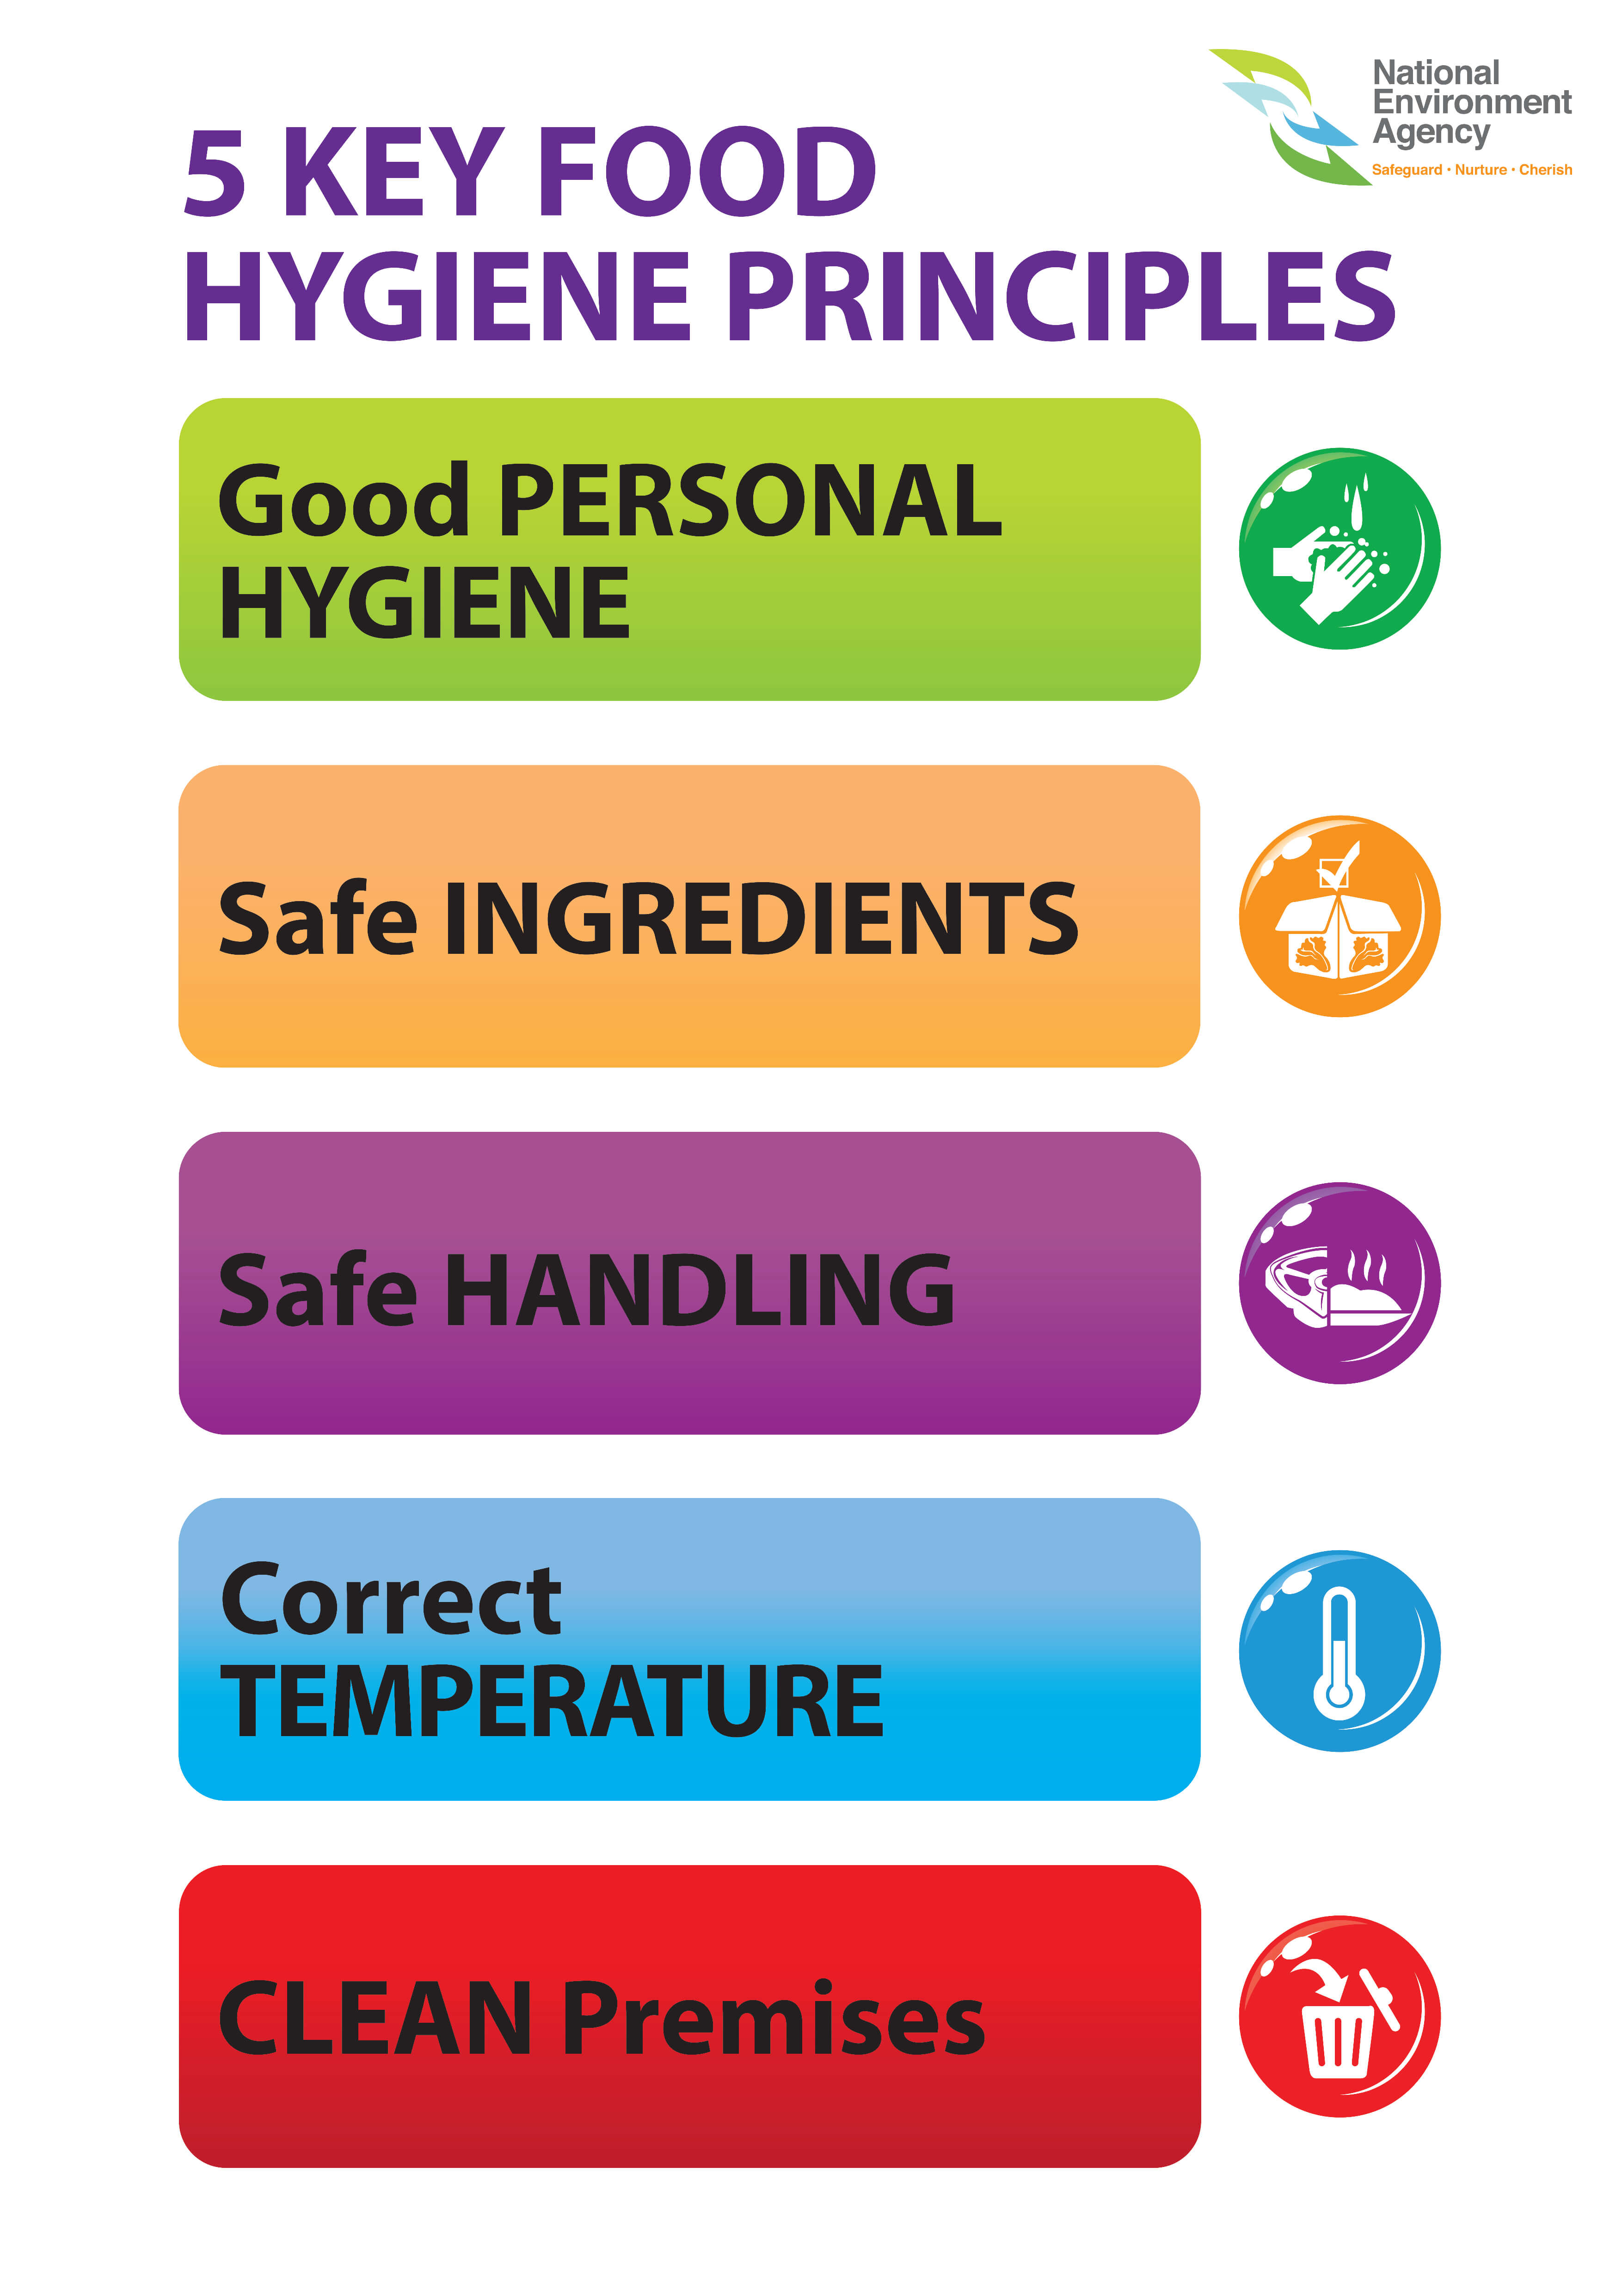 research into food hygiene practices